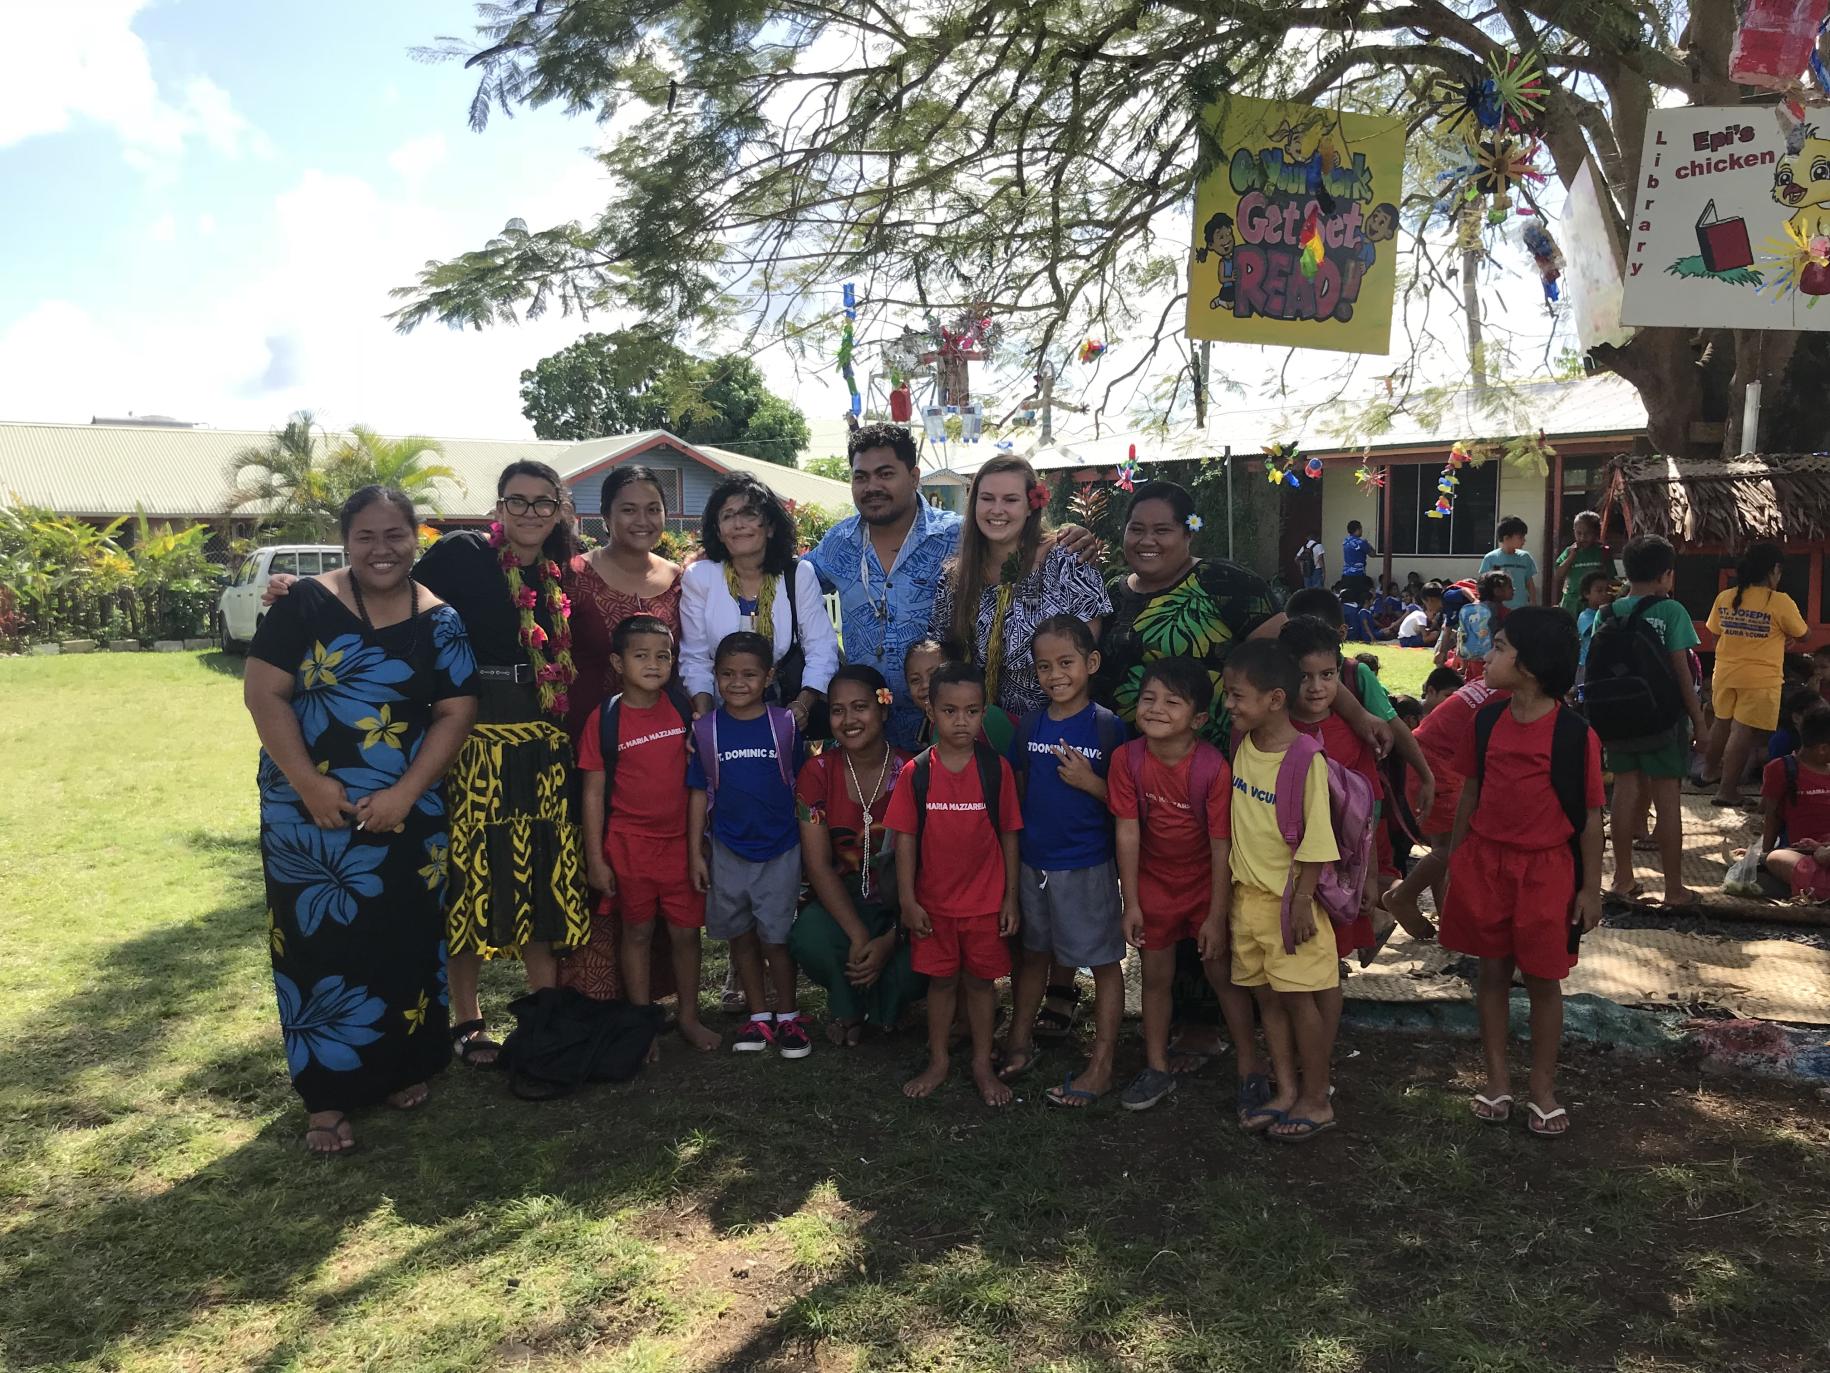 7 adults and 9 children stading under a tree in an education-related event